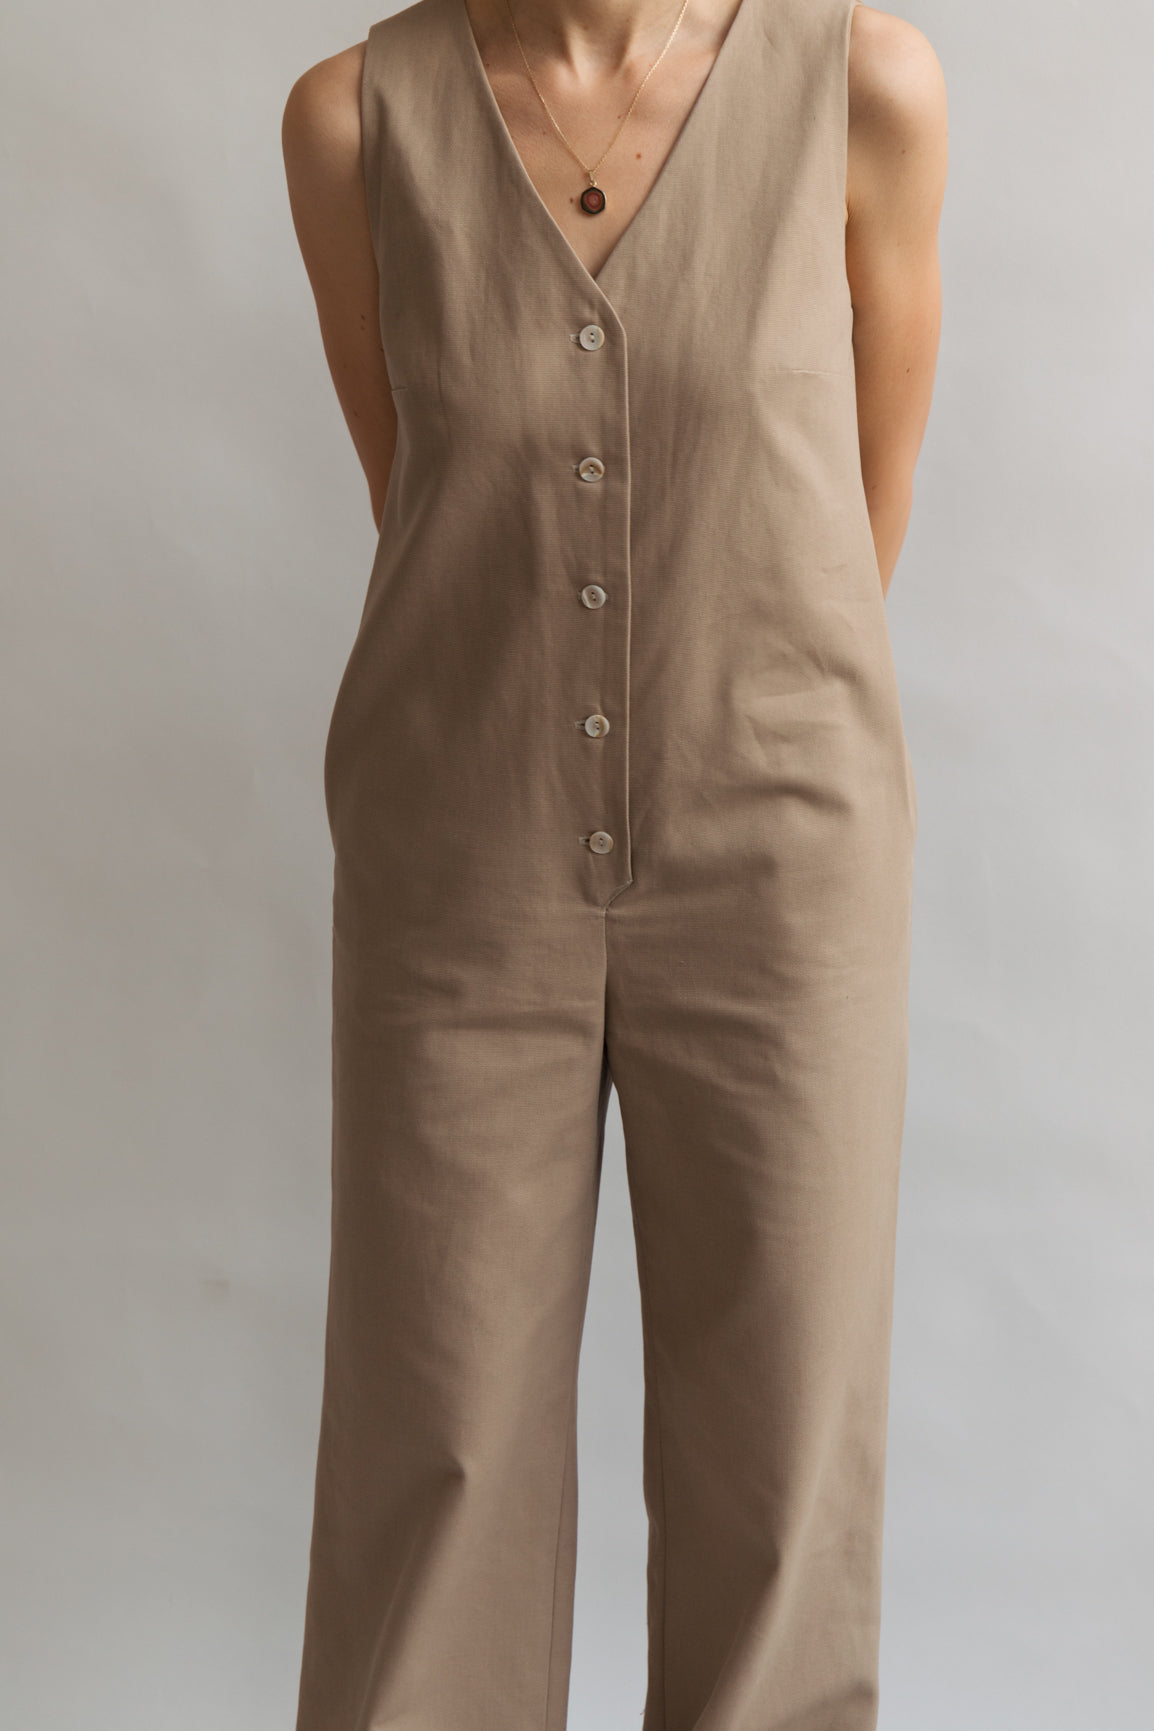 Beige color Jumpsuit workwear cotton canvas with pockets 5 buttons v-neck tall girls short girls oeko-tex 